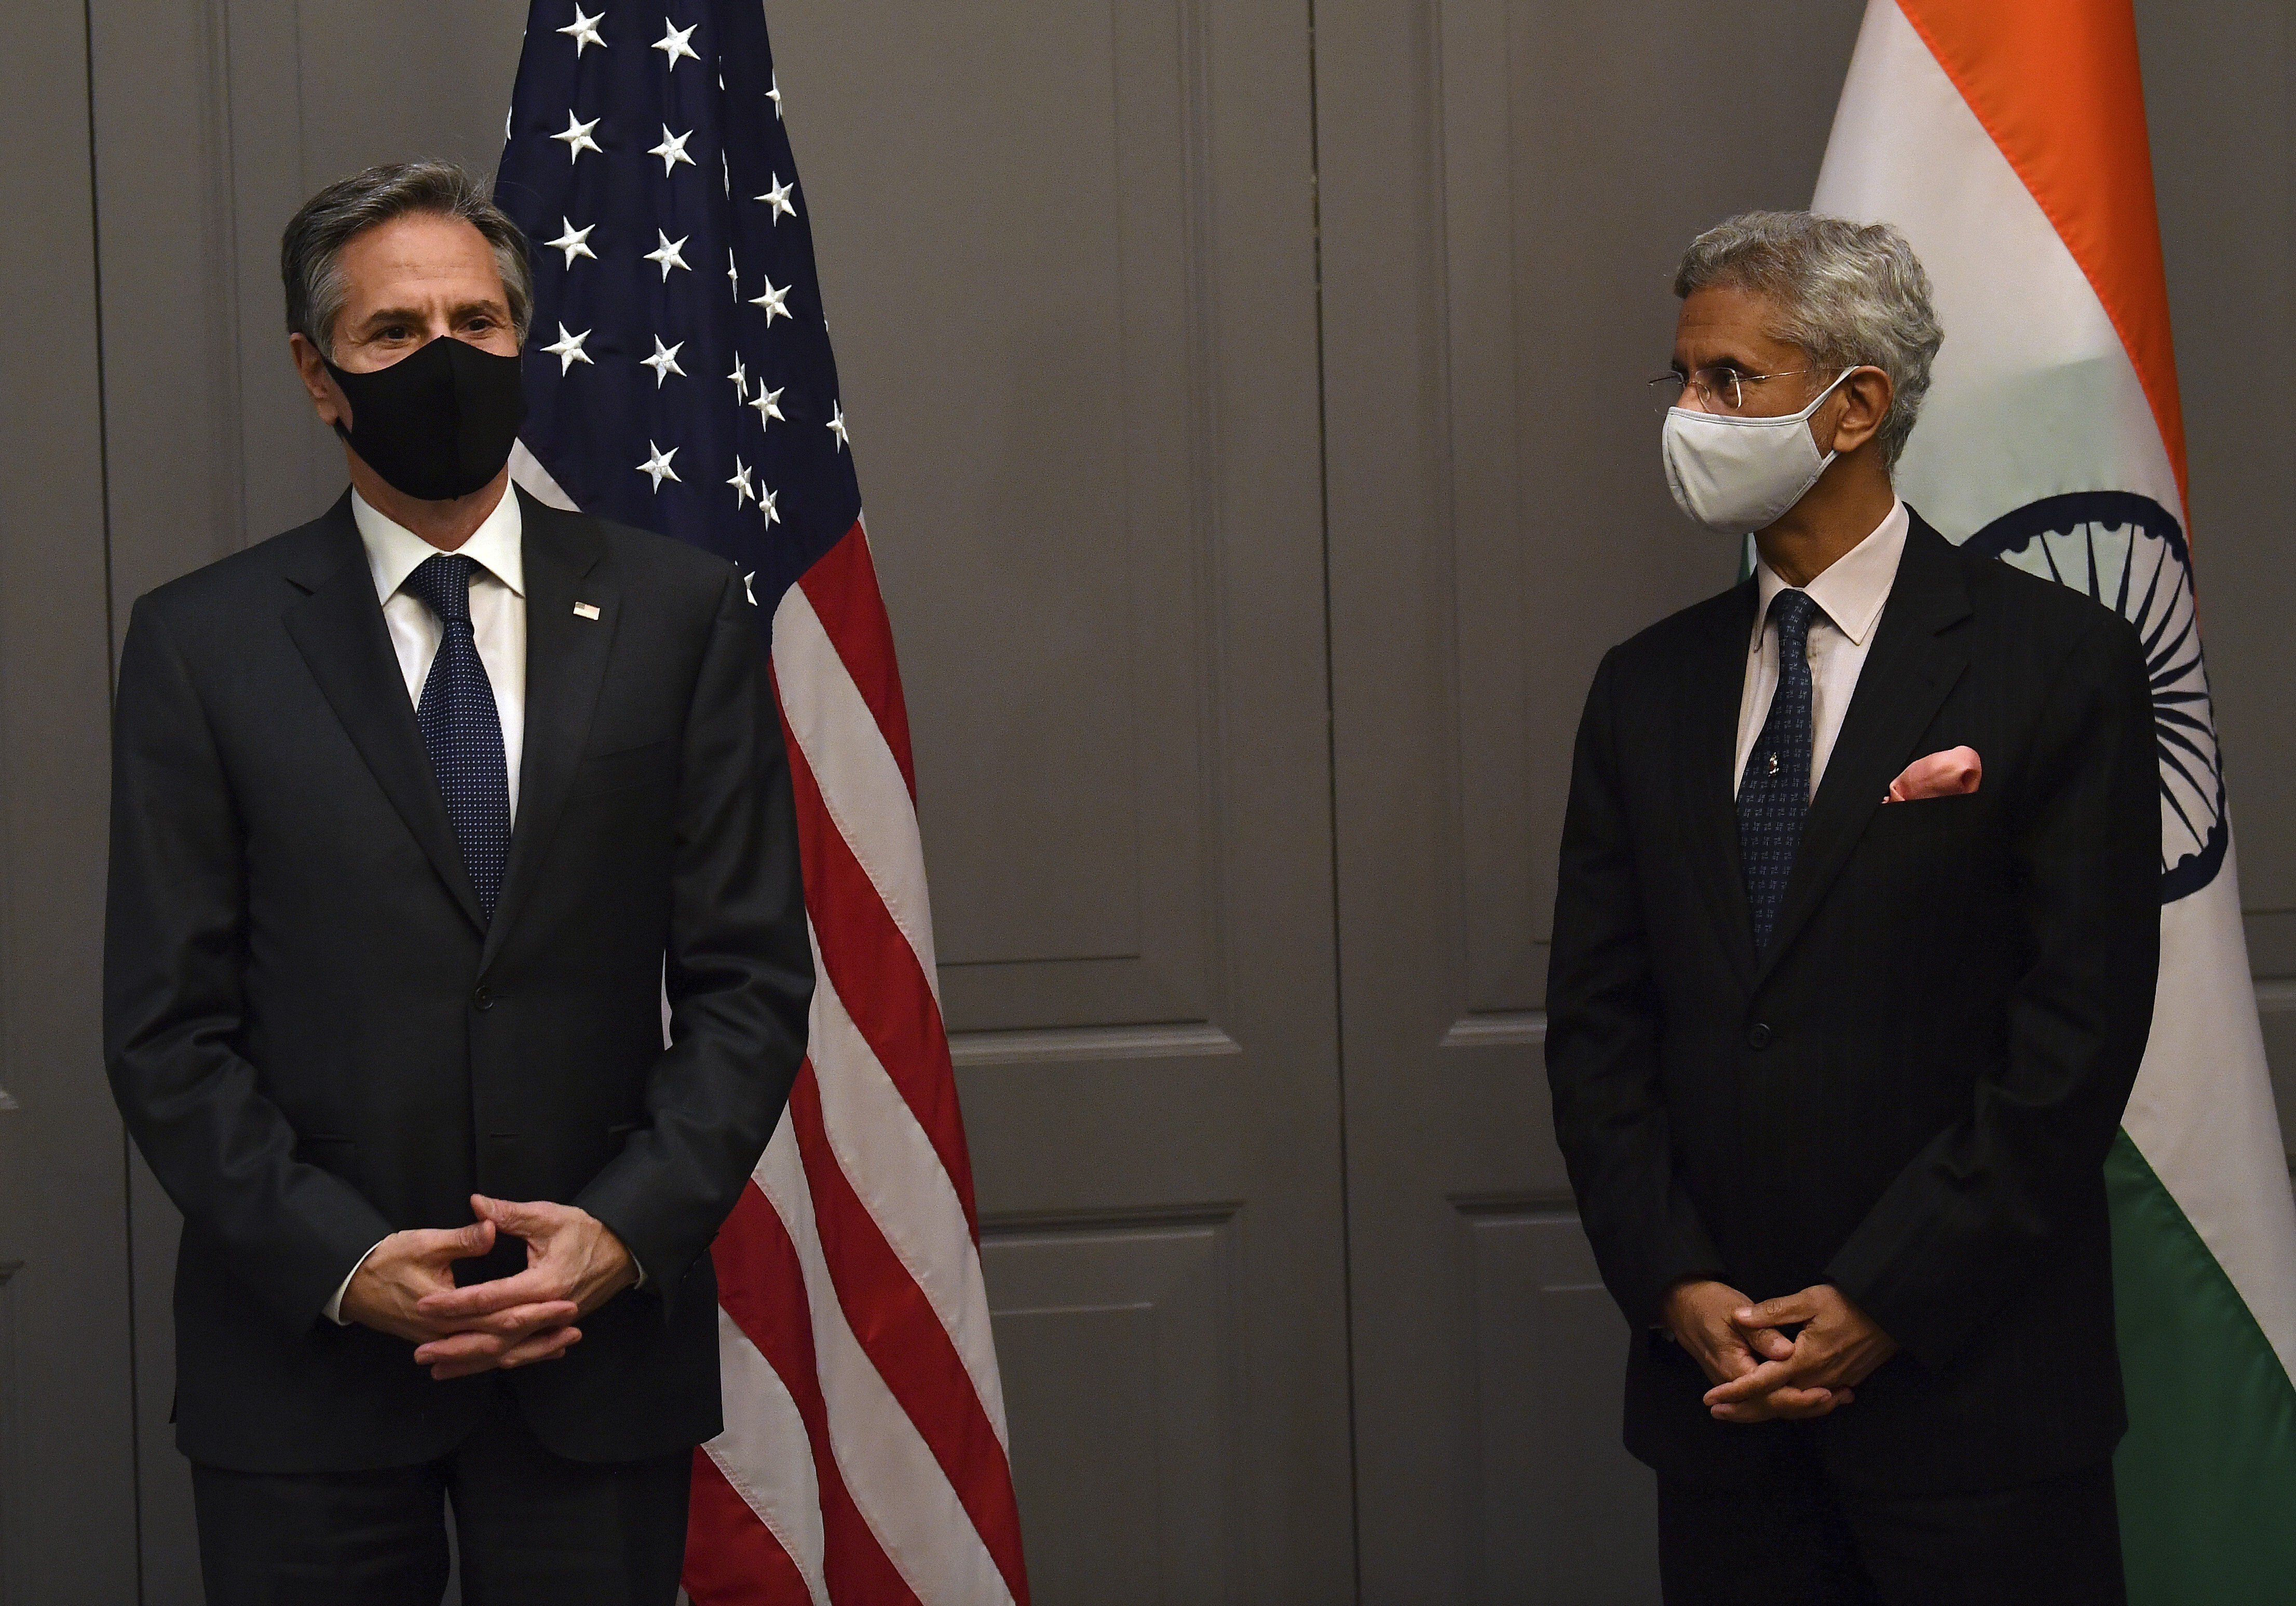 US Secretary of State Antony Blinken, left, attends a press conference with India‘s foreign minister Subrahmanyam Jaishankar following a bilateral meeting in London on May 3. Photo: AP